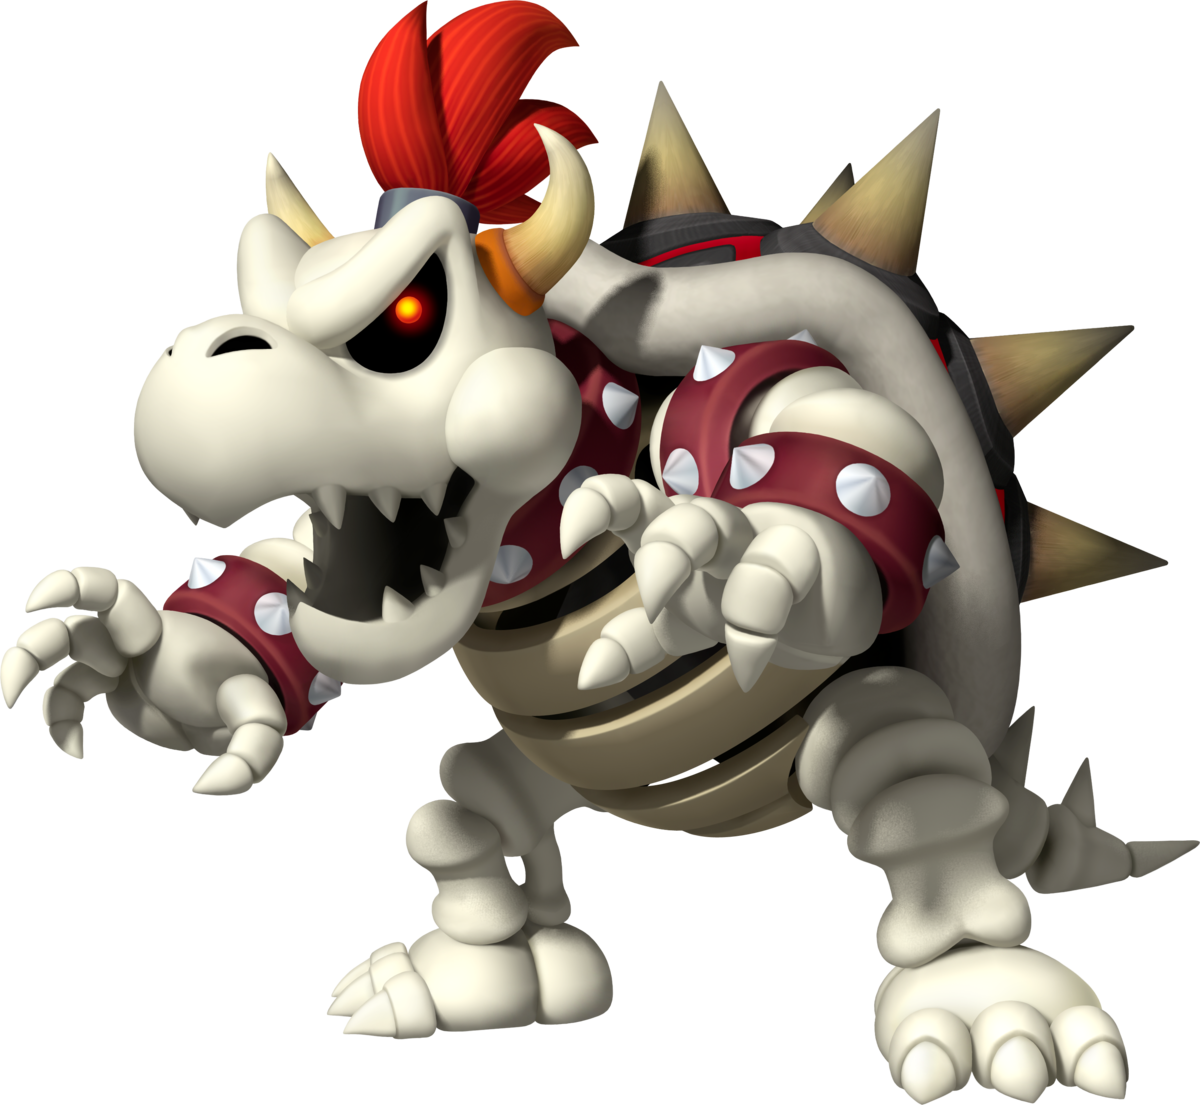 Anarchy In The Galaxy: 25 Days of Villains - #14: Bowser